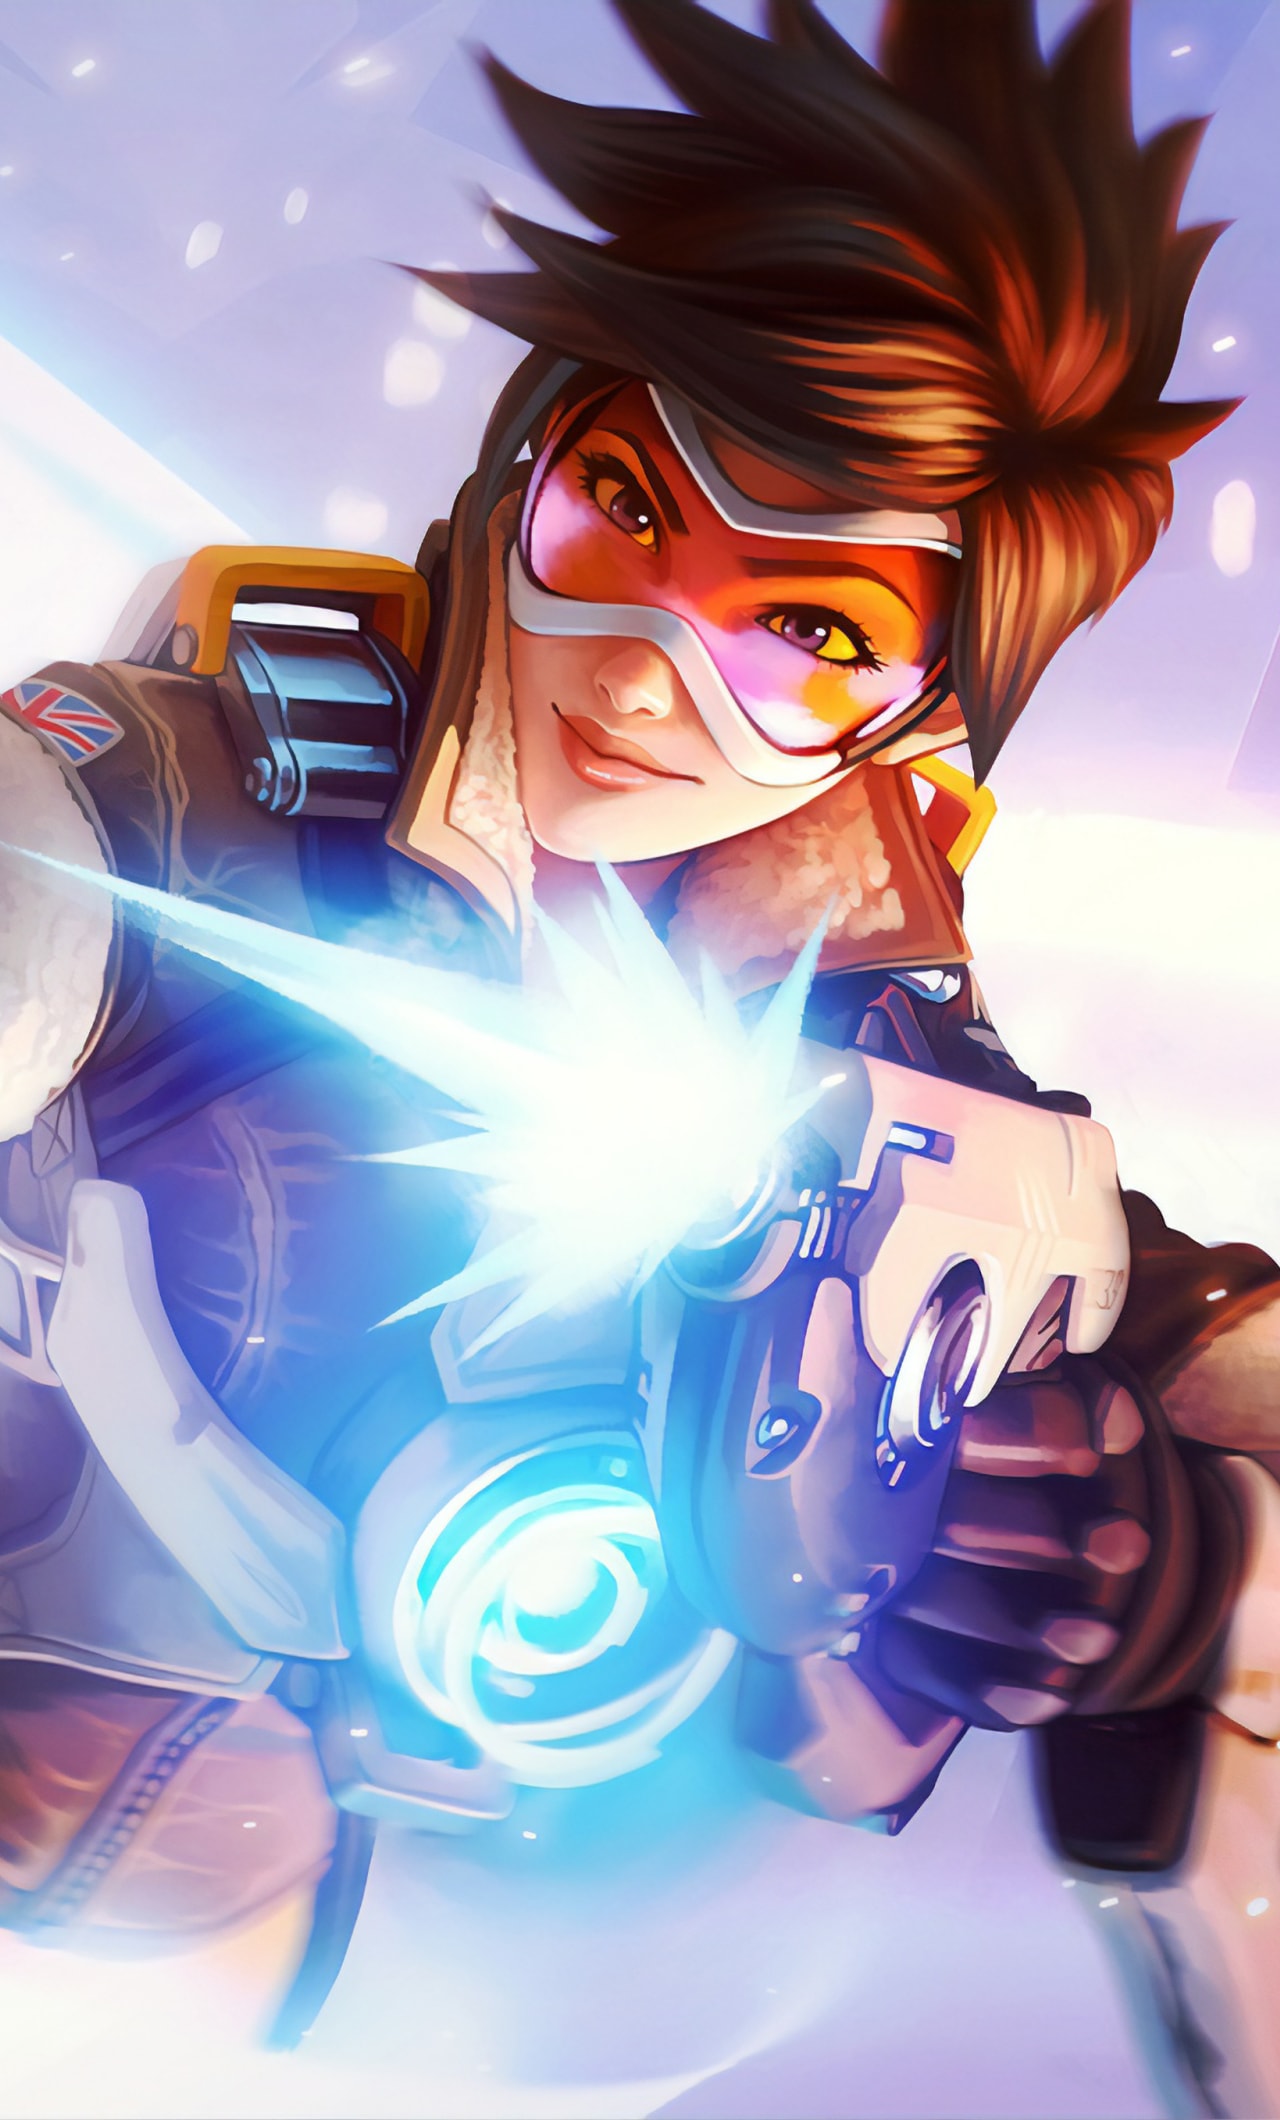 Overwatch Android Wallpaper Kolpaper Awesome Free Hd Wallpapers